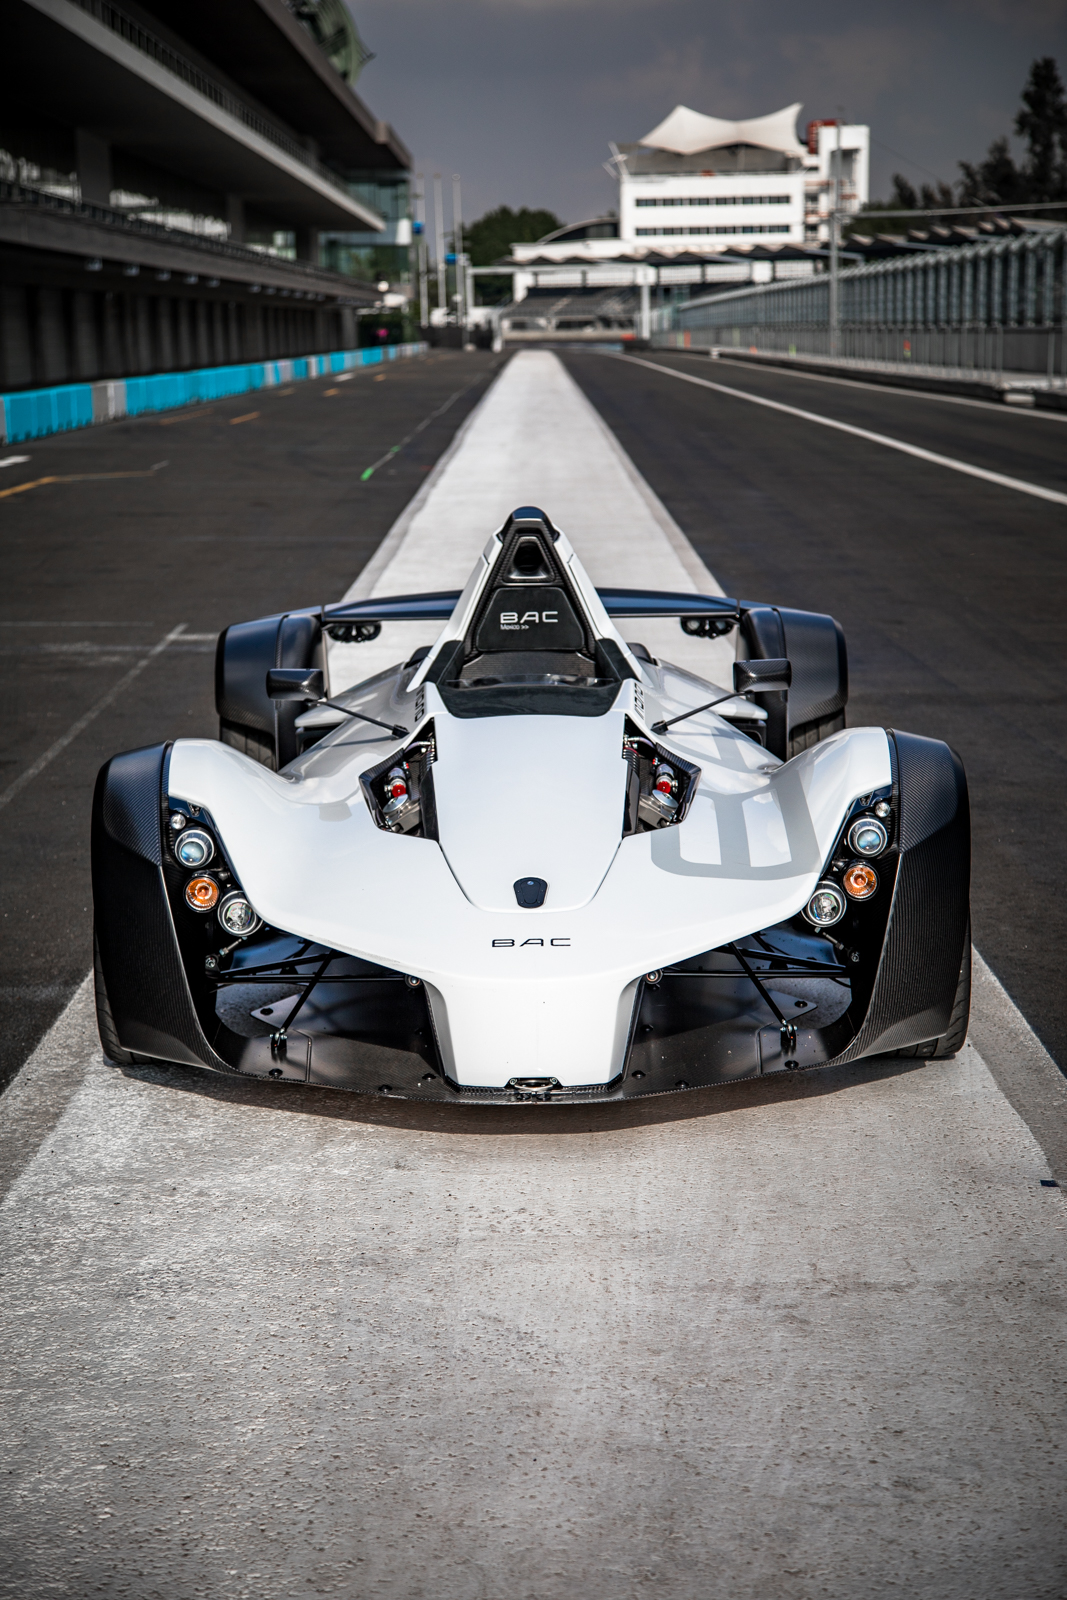 Motorsport PR: New Briggs Automotive Company (BAC) dealership BAC Mexico has hosted its first Mono customer experience sessions in Mexico City